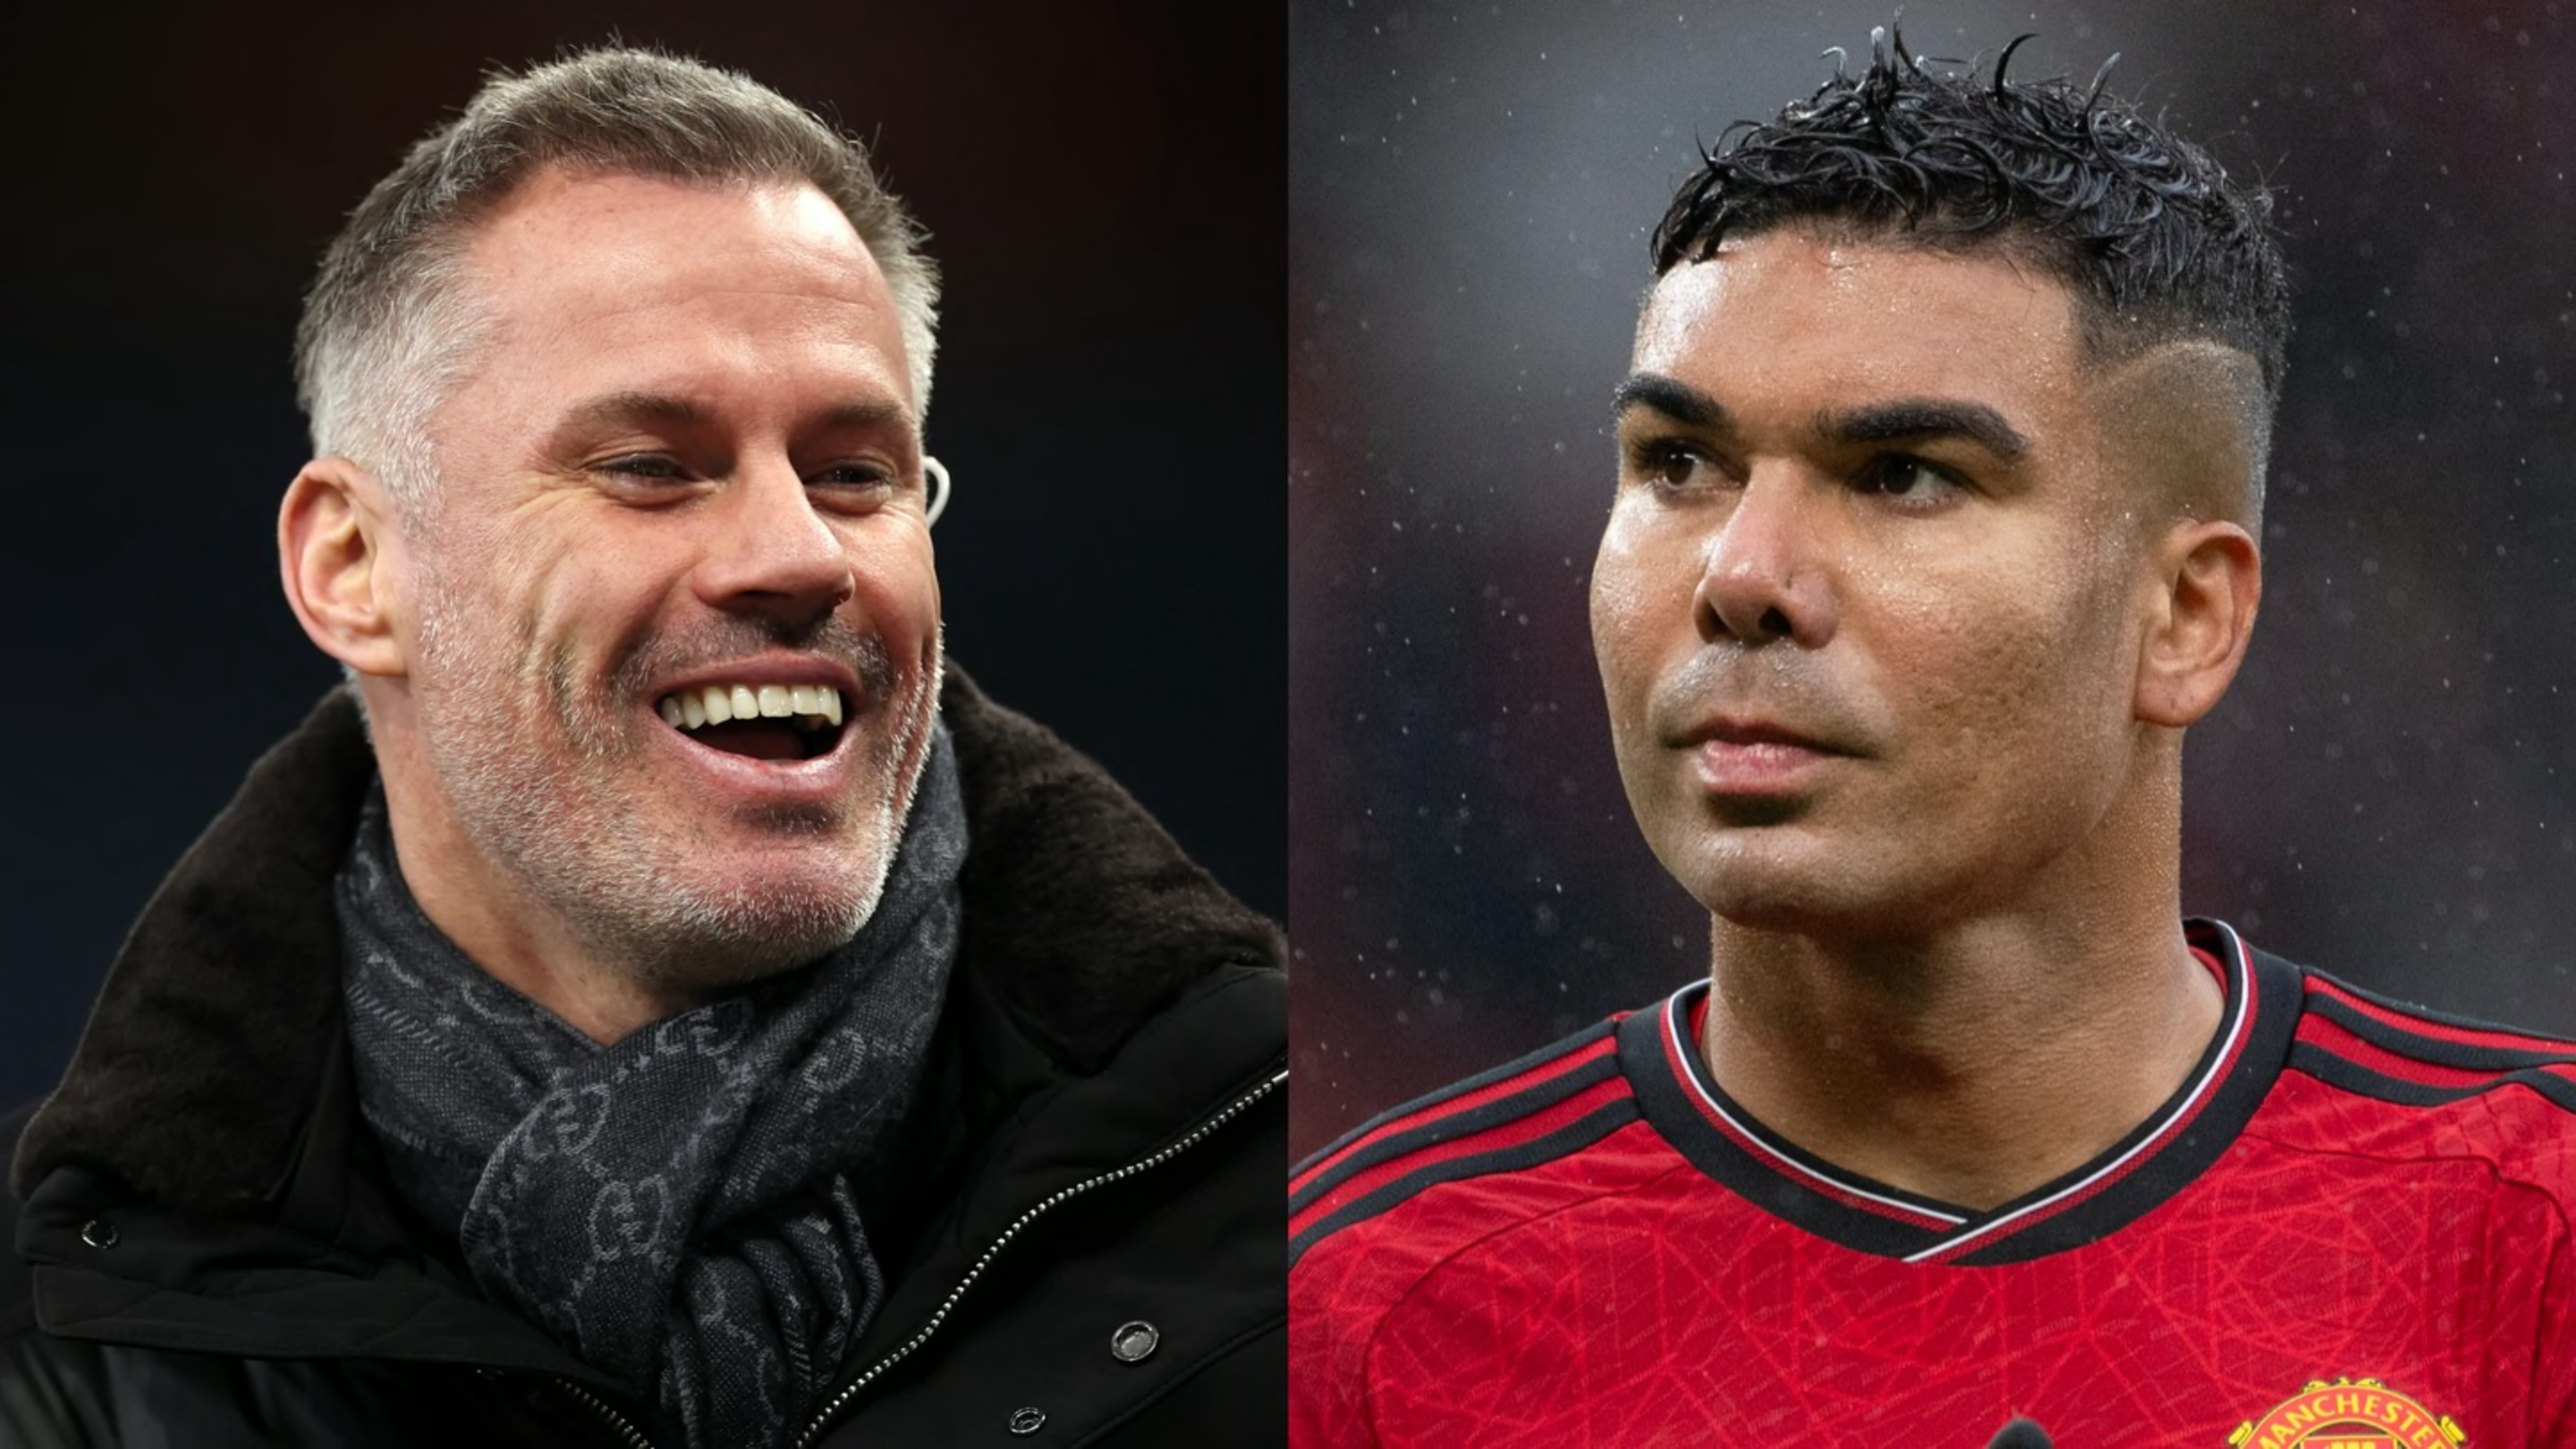 'I'm deadly serious' - Jamie Carragher delivers brutal criticism of Casemiro